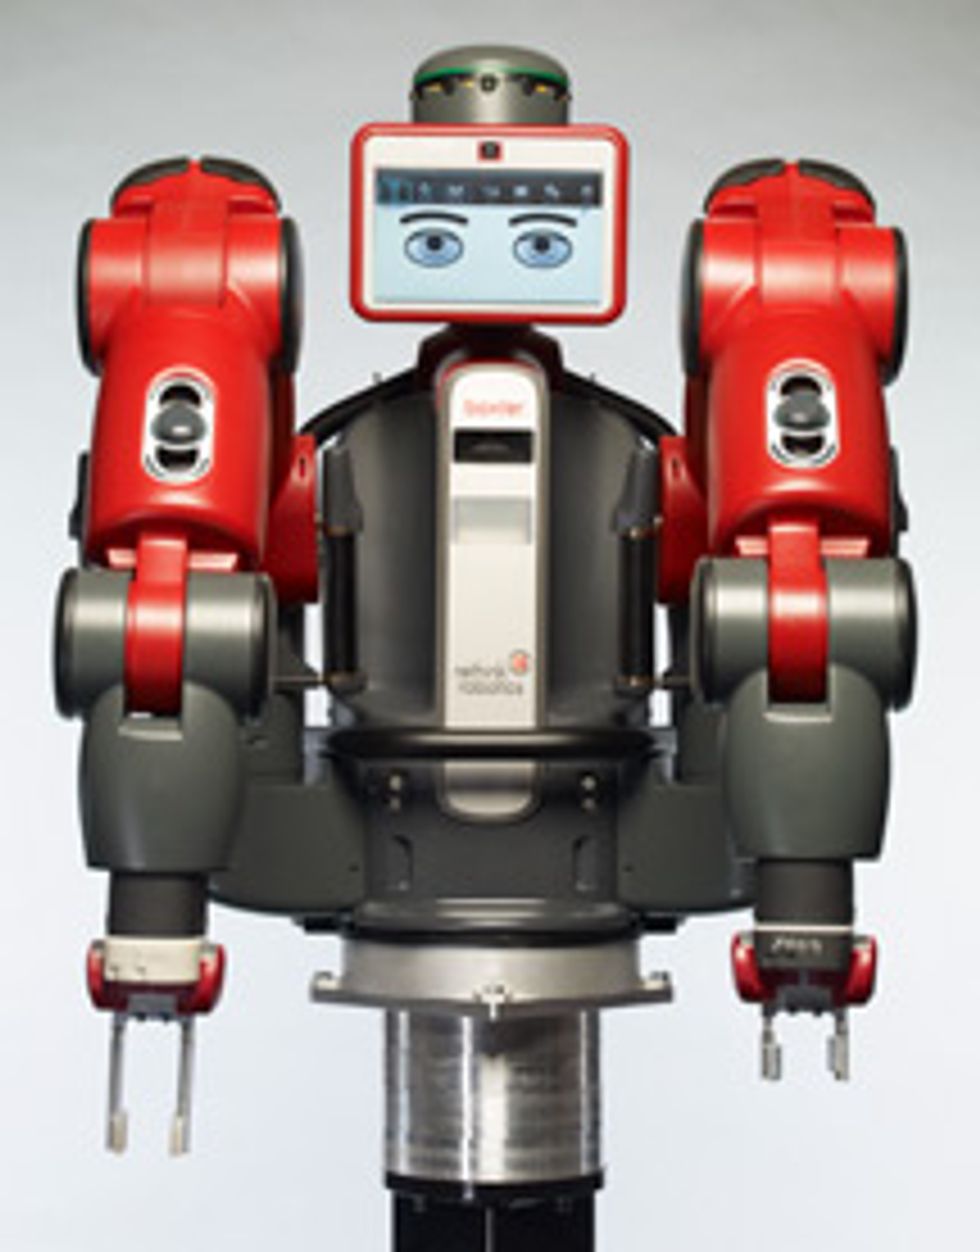 meet baxter: Rethink Robotics has developed a next-generation factory robot that is versatile, easy to program, and costs just US $22 000.\u2029